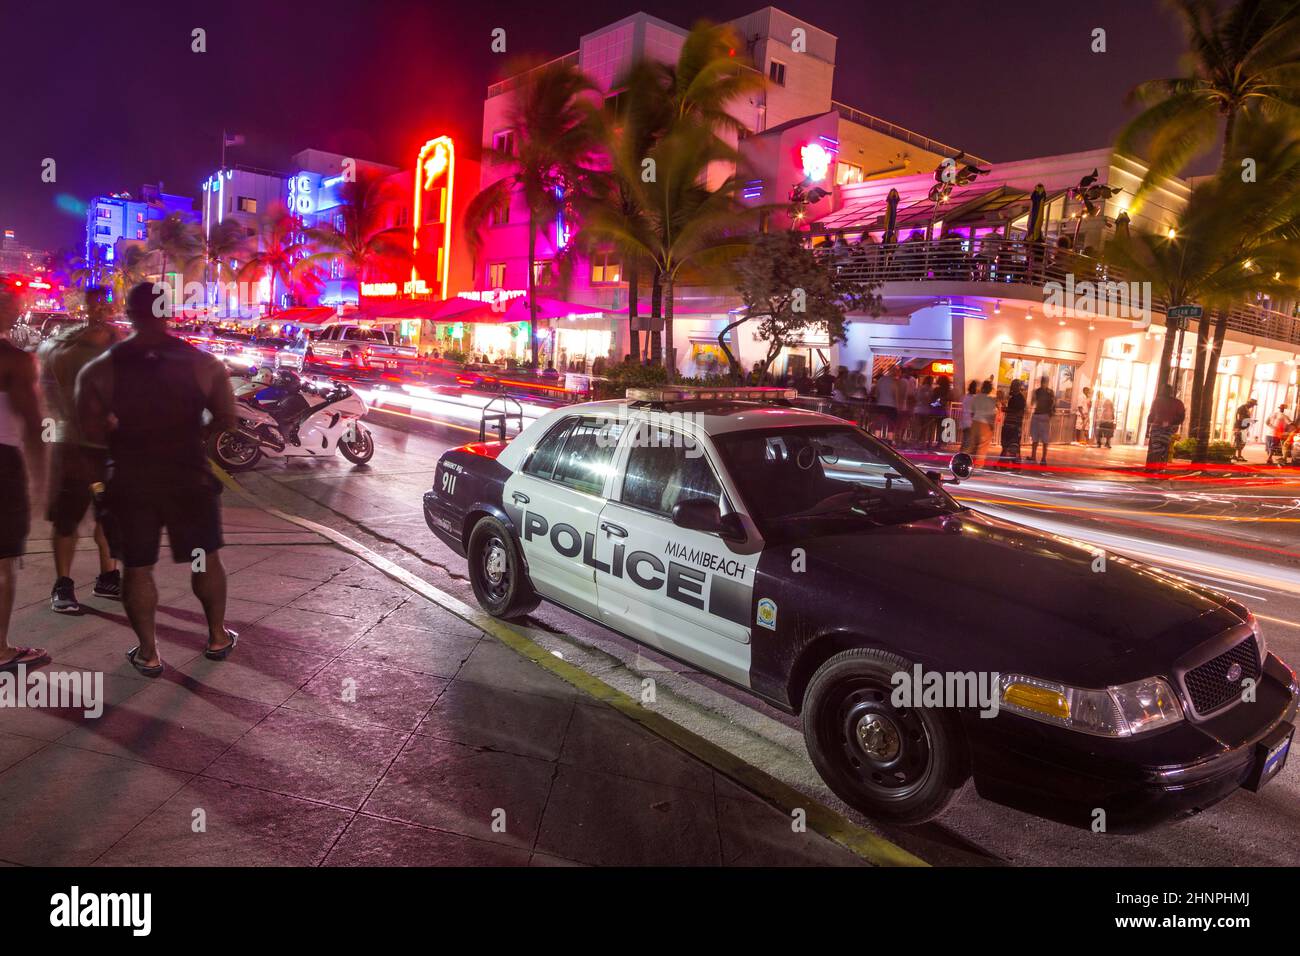 police car parks at the Ocean Drive along South Beach Miami in the historic Art Deco District with hotels, restaurant and bar by night Stock Photo